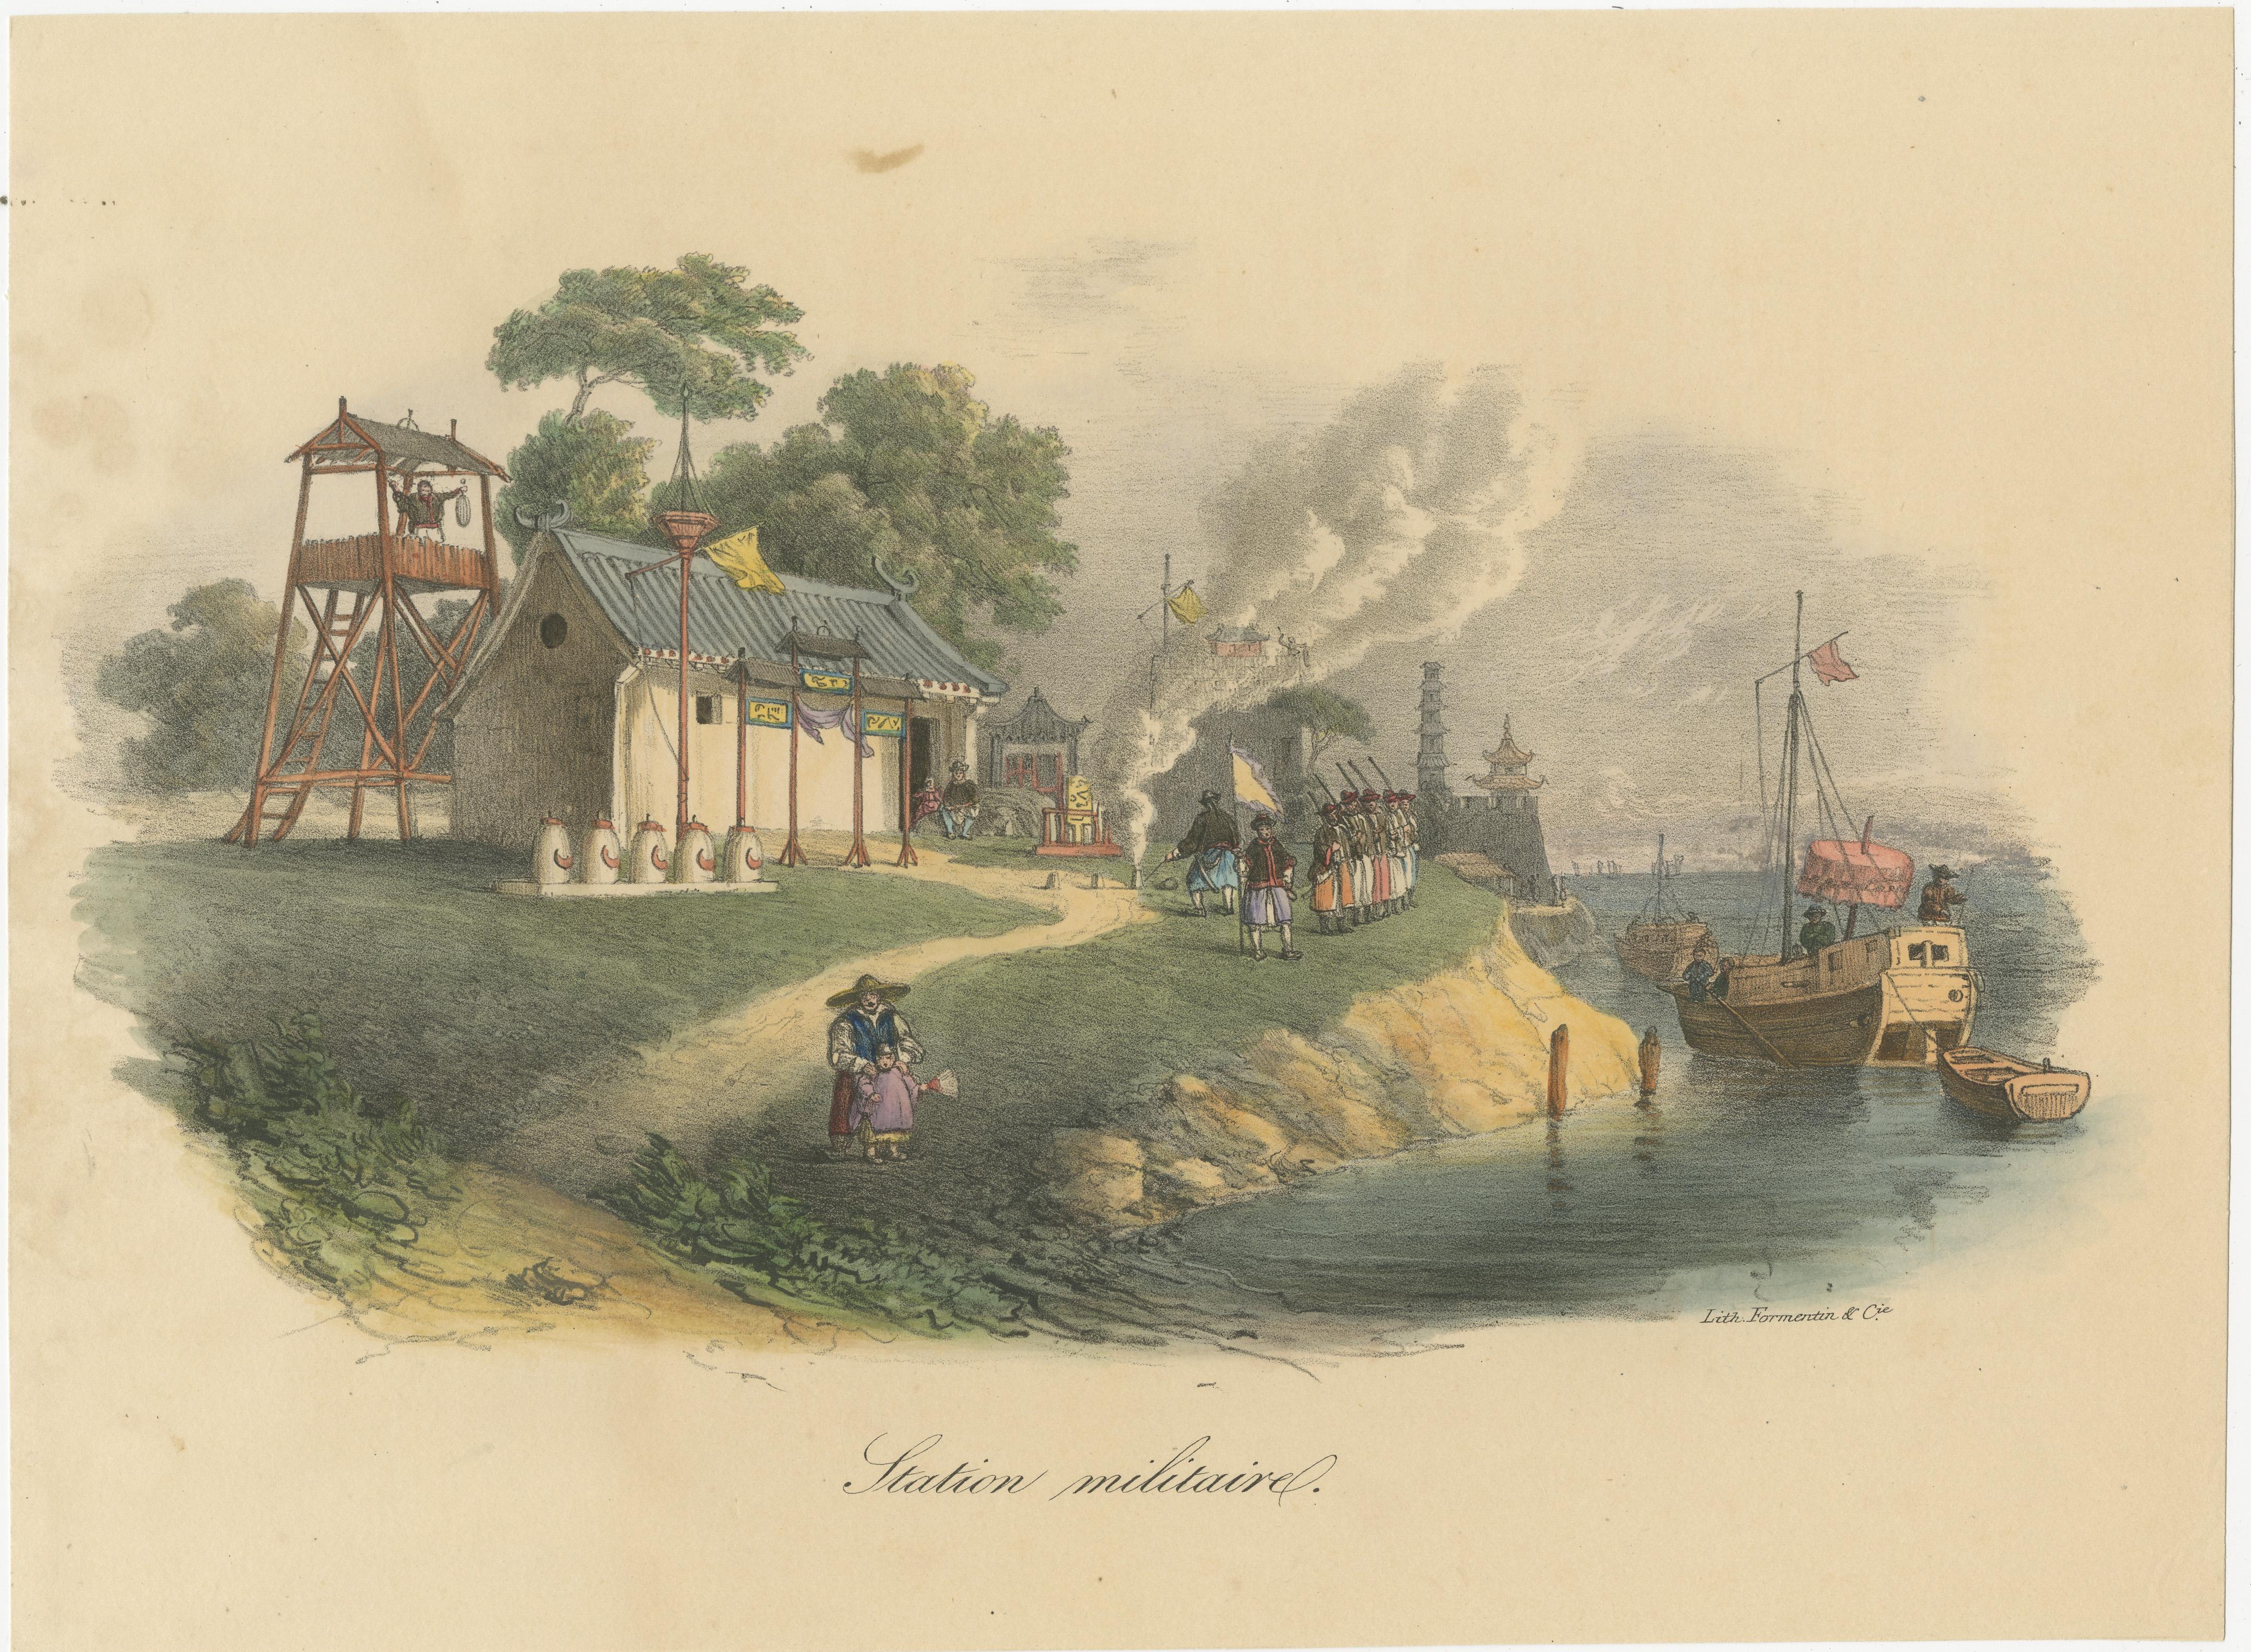 Antique print titled 'Station militaire'. Print of a Chinese military station. Published by Formentin & Cie, circa 1830.